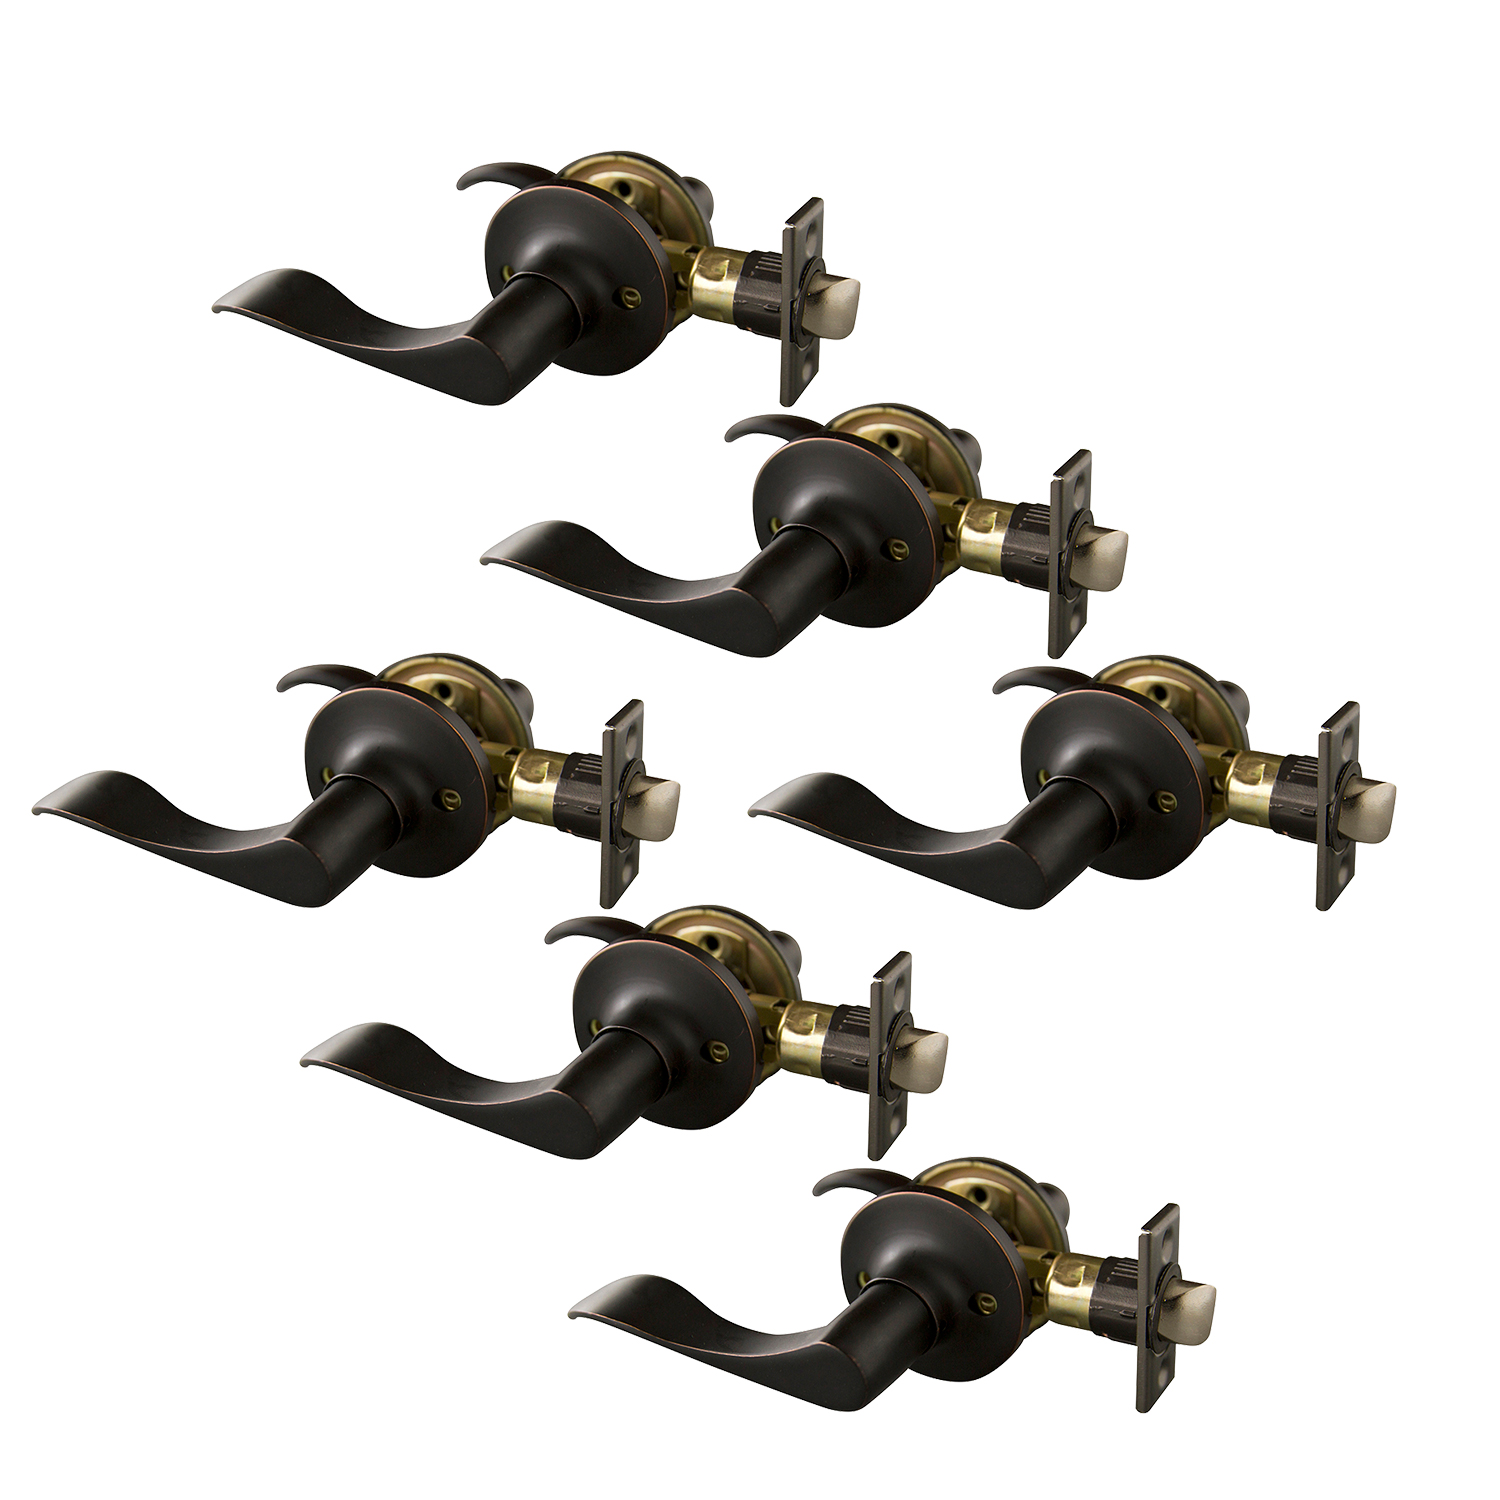 Design House 190736 Stratford 6-Way Universal Passage Hall and Closet Door Lever Oil Rubbed Bronze 6-Pack - image 1 of 16